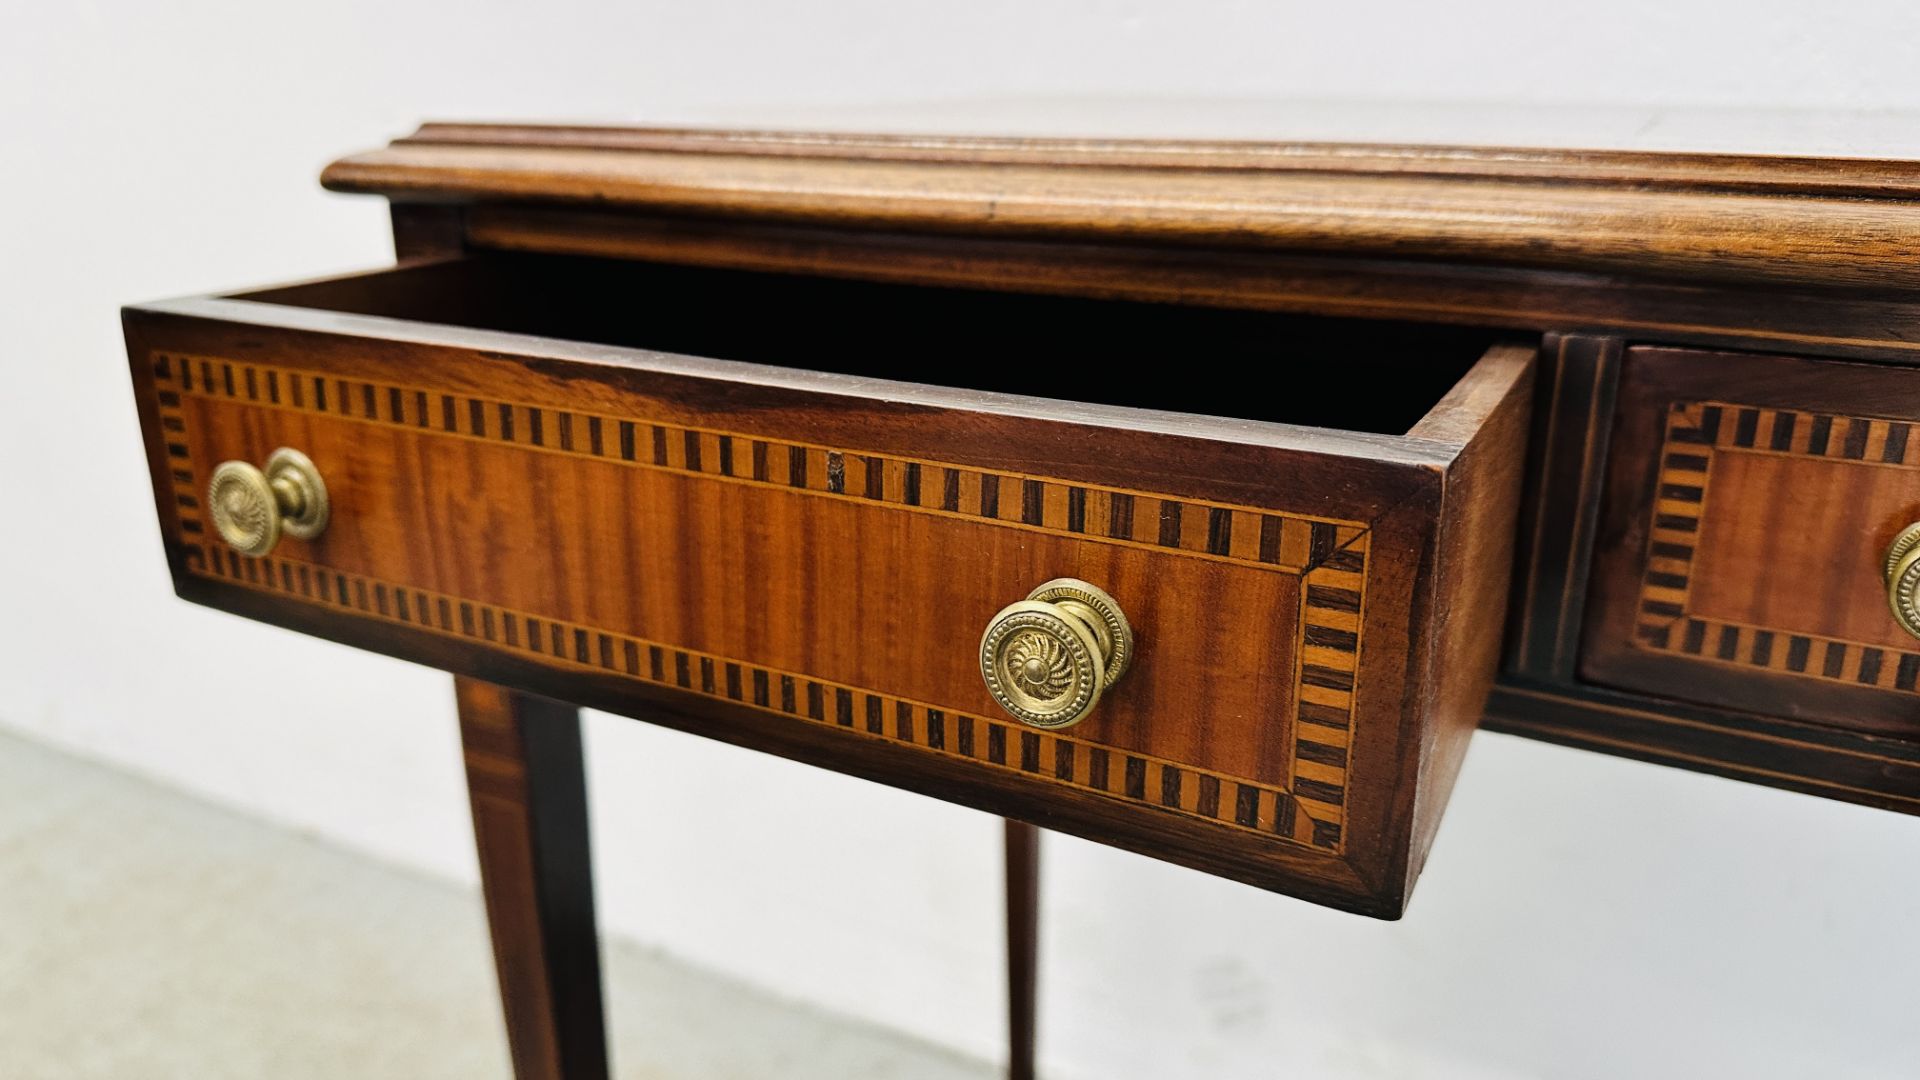 ANTIQUE MAHOGANY & INLAID 2 DRAWER WRITING TABLE WITH BRASS DETAILED HANDLES STANDING ON CASTERS, - Image 9 of 11